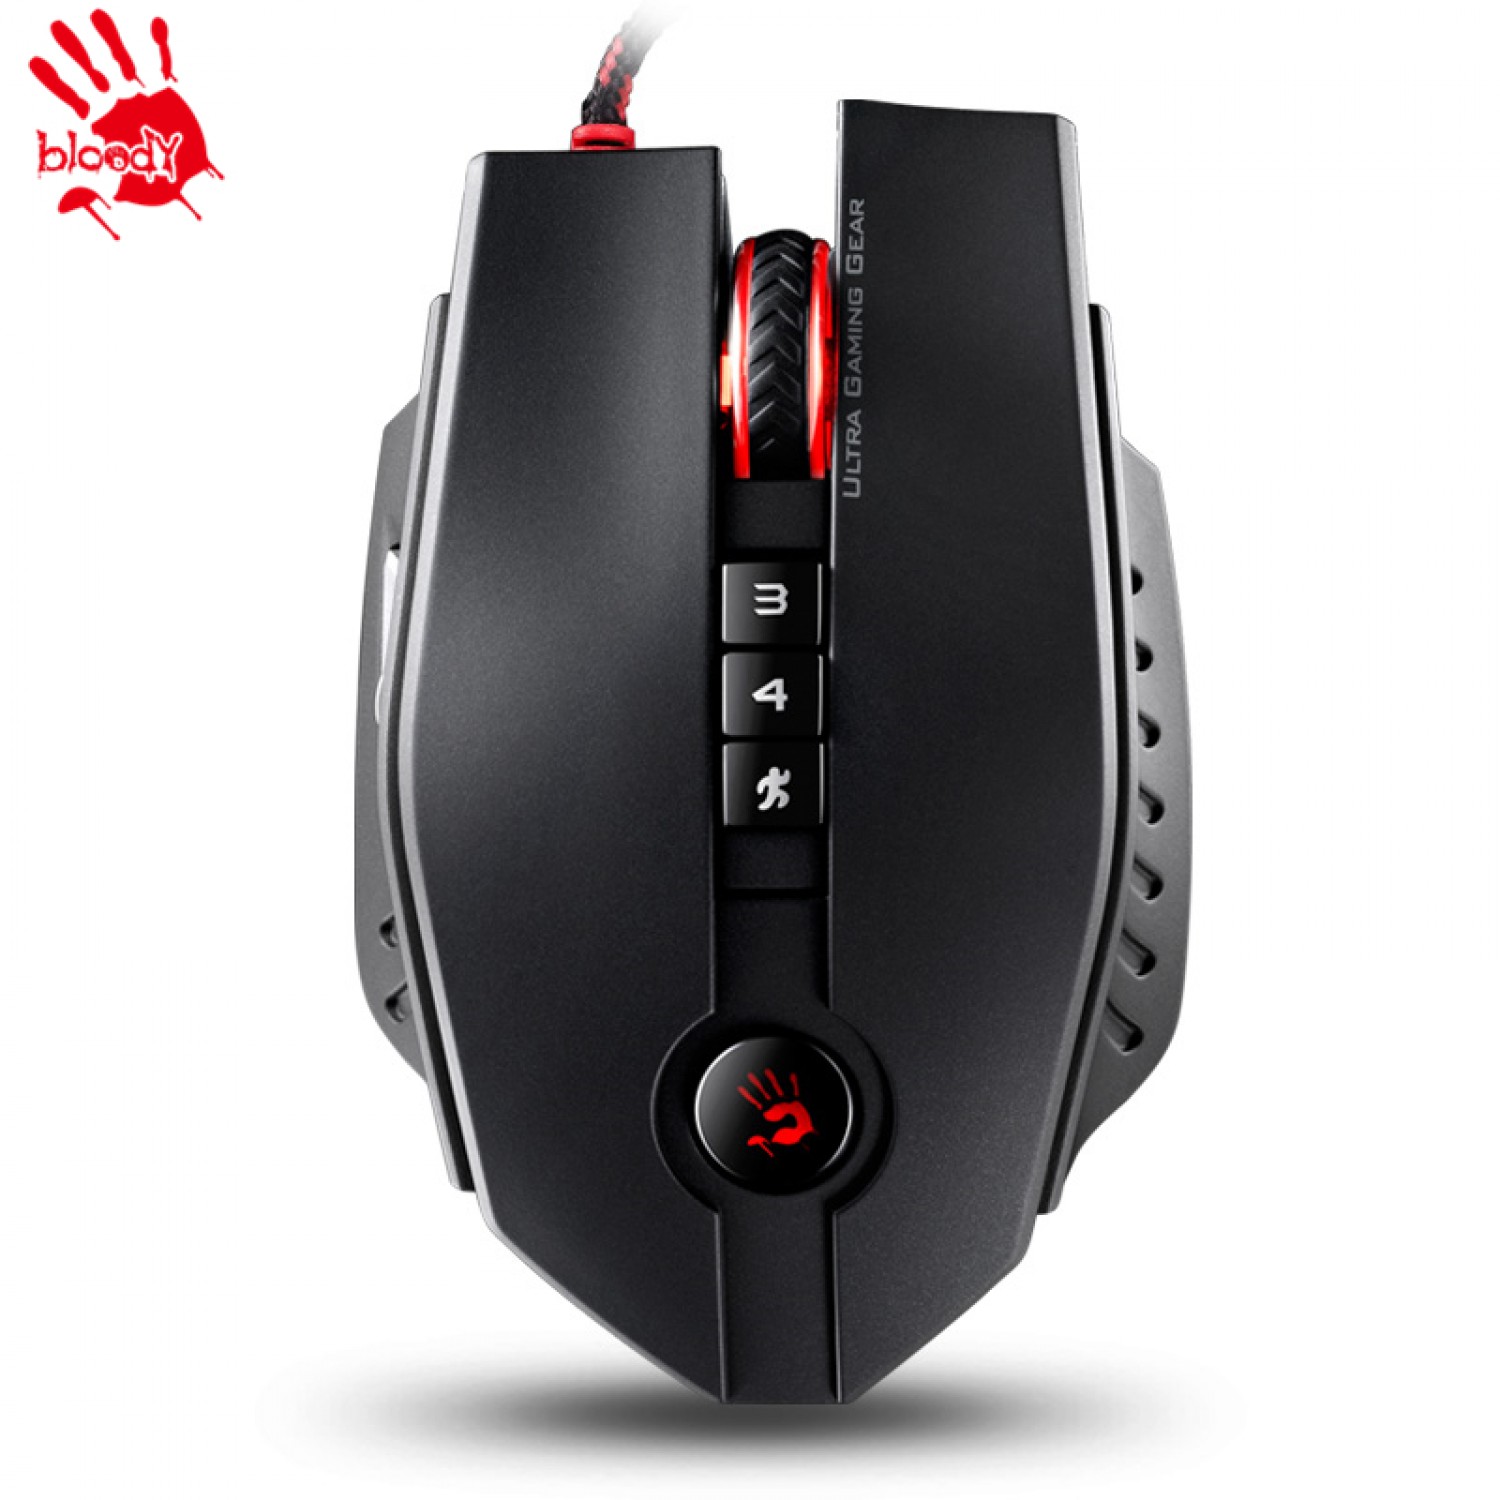  A4tech Bloody Zl50 Gaming Mouse-2